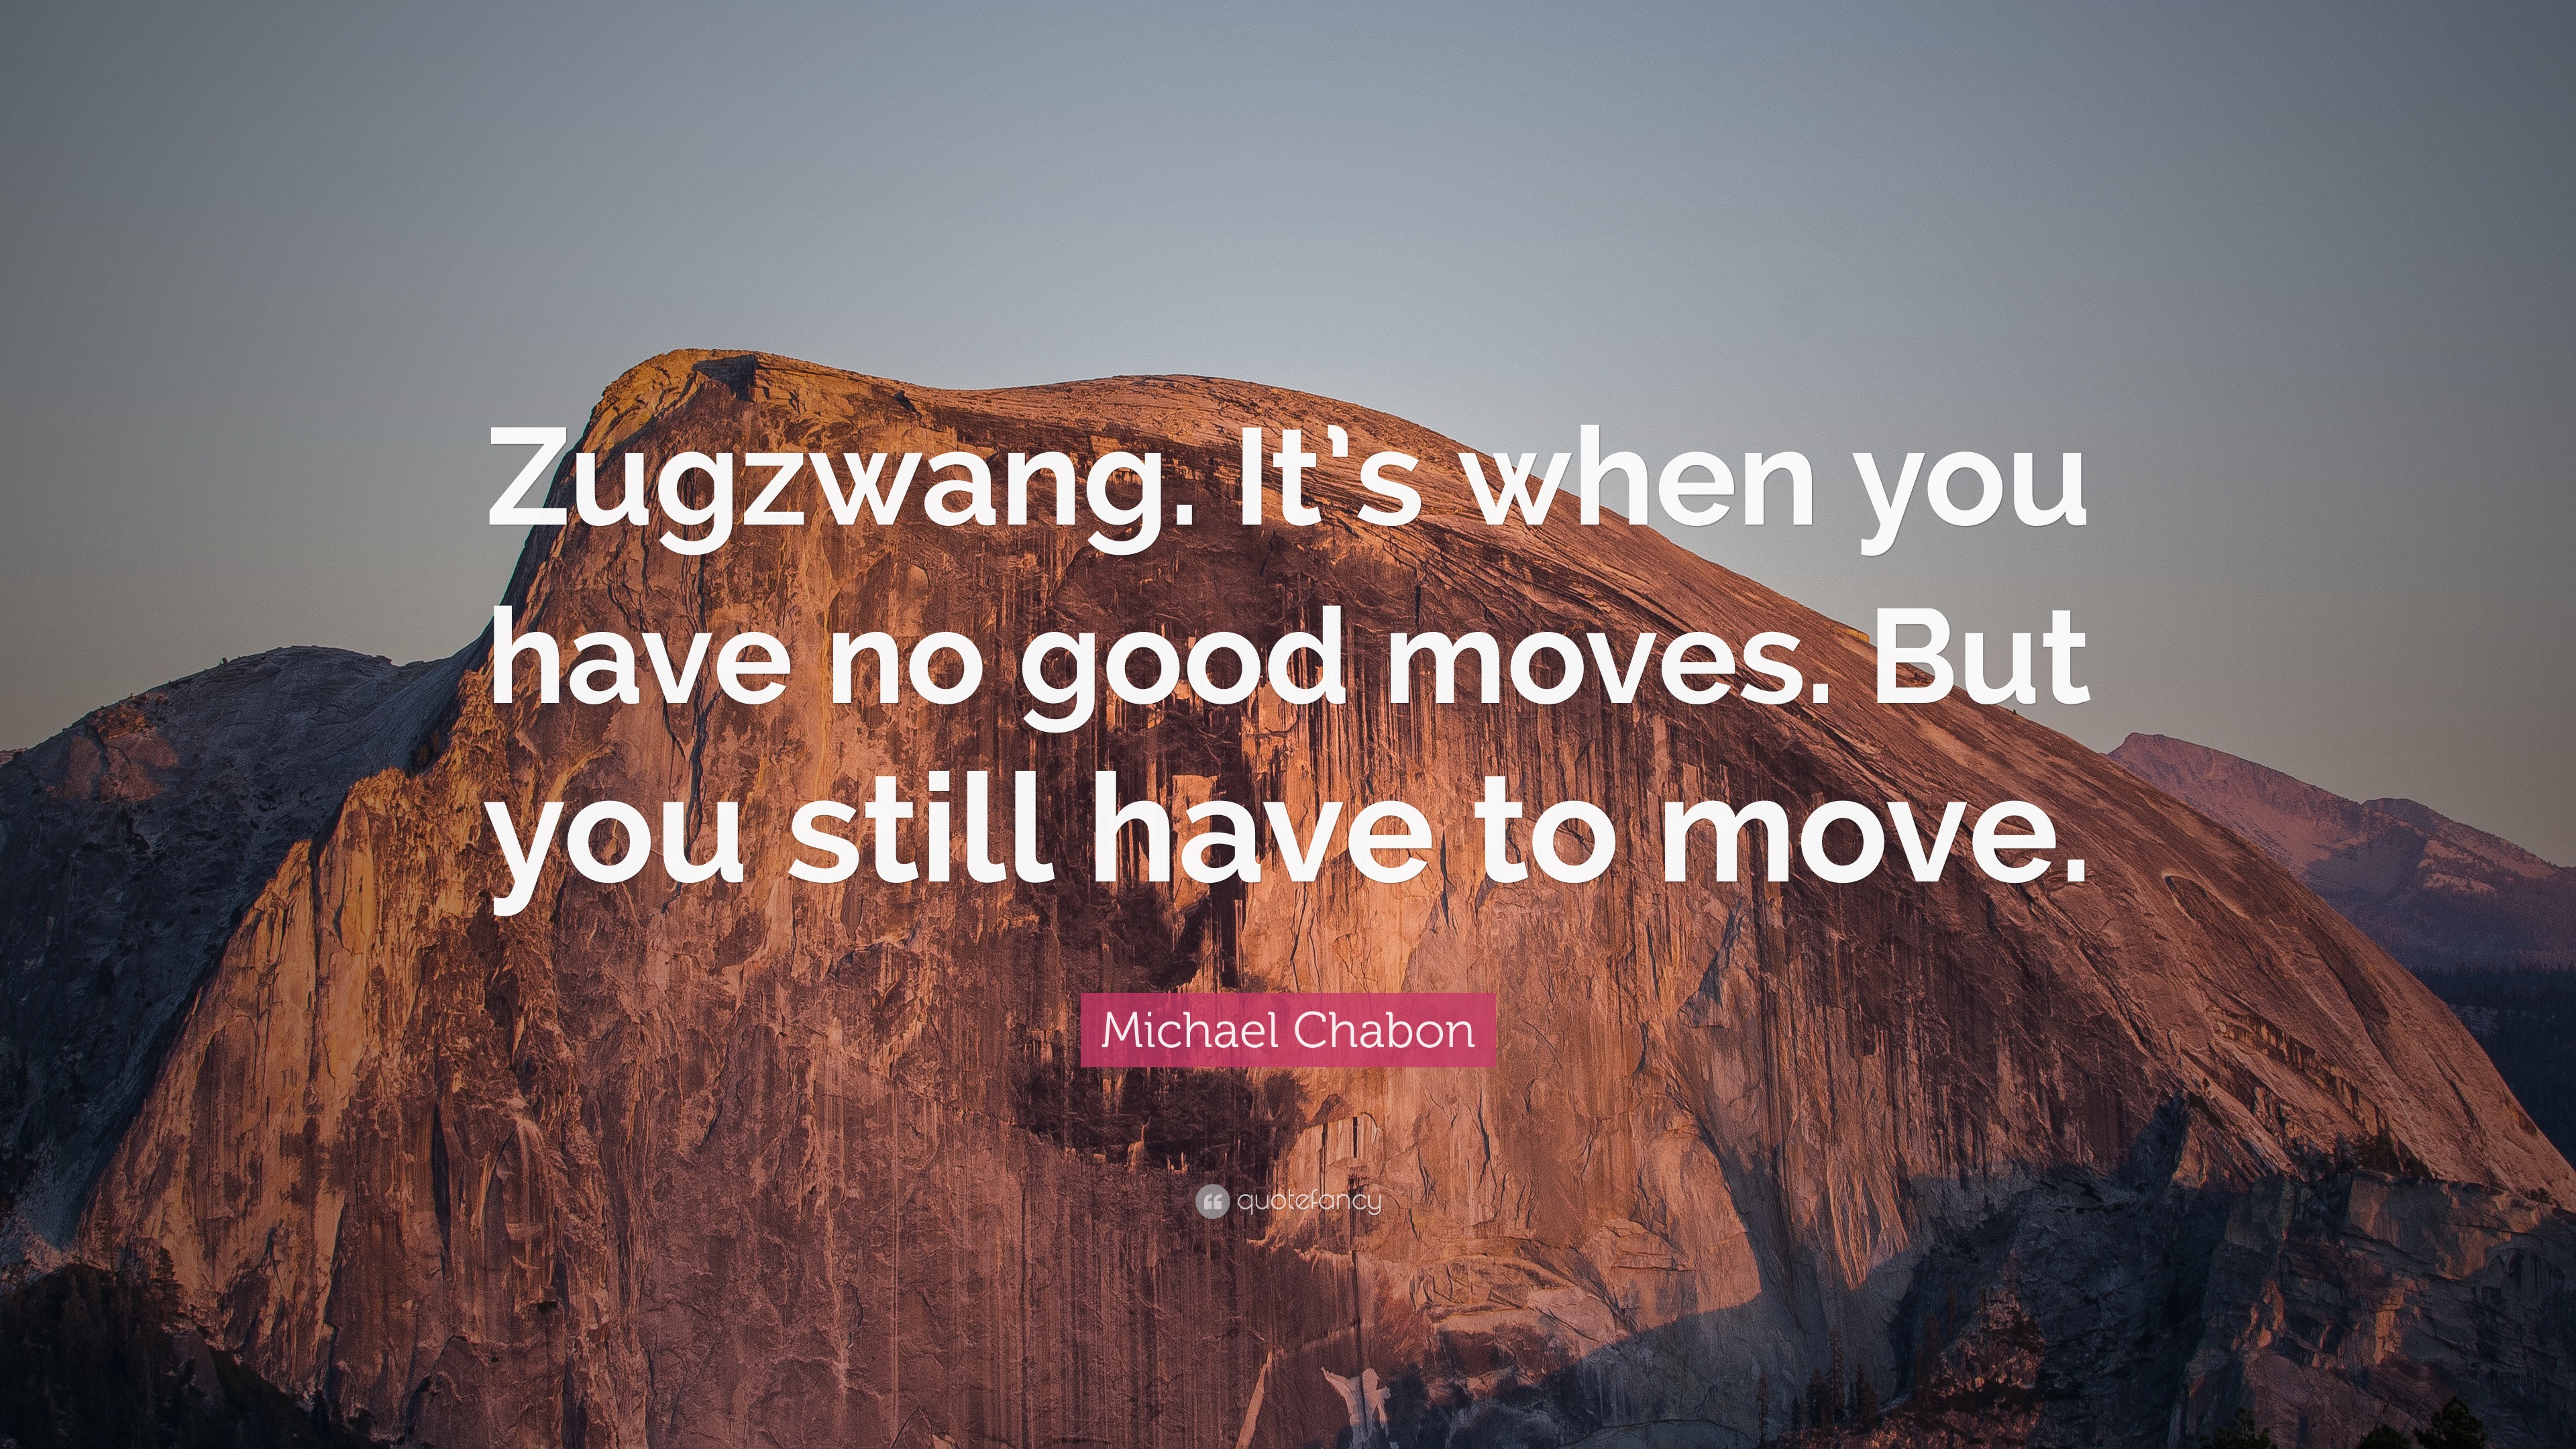 Zugzwang (n) when the best viable move is not to move  Greeting